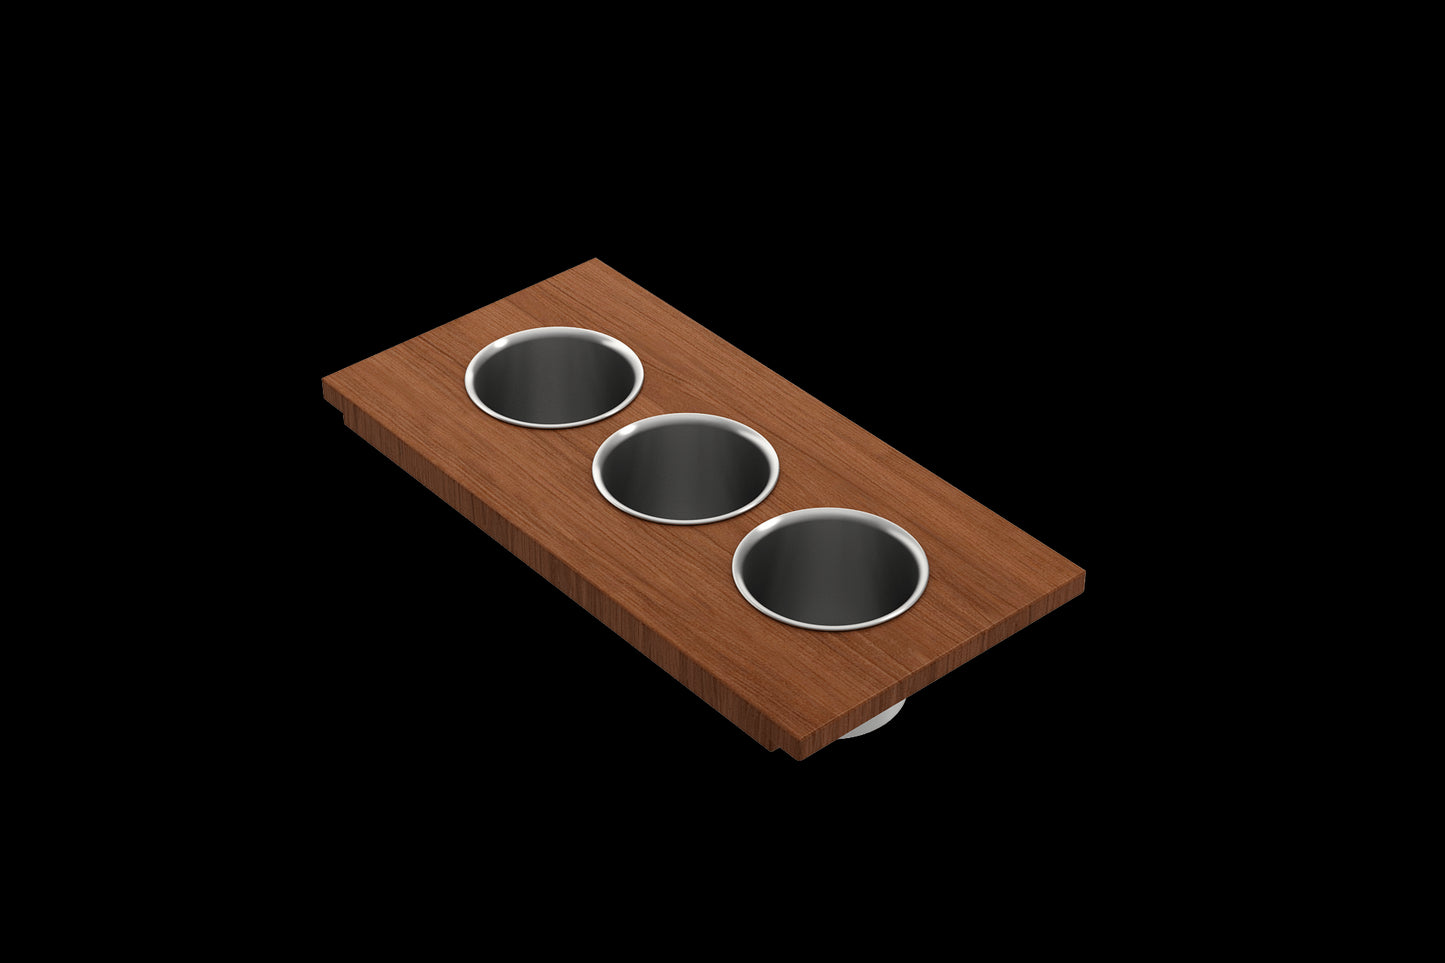 Wood Board with 3 Rectangular Stainless Steel Bowls F/1616, 1618, 1633 (inner ledge)